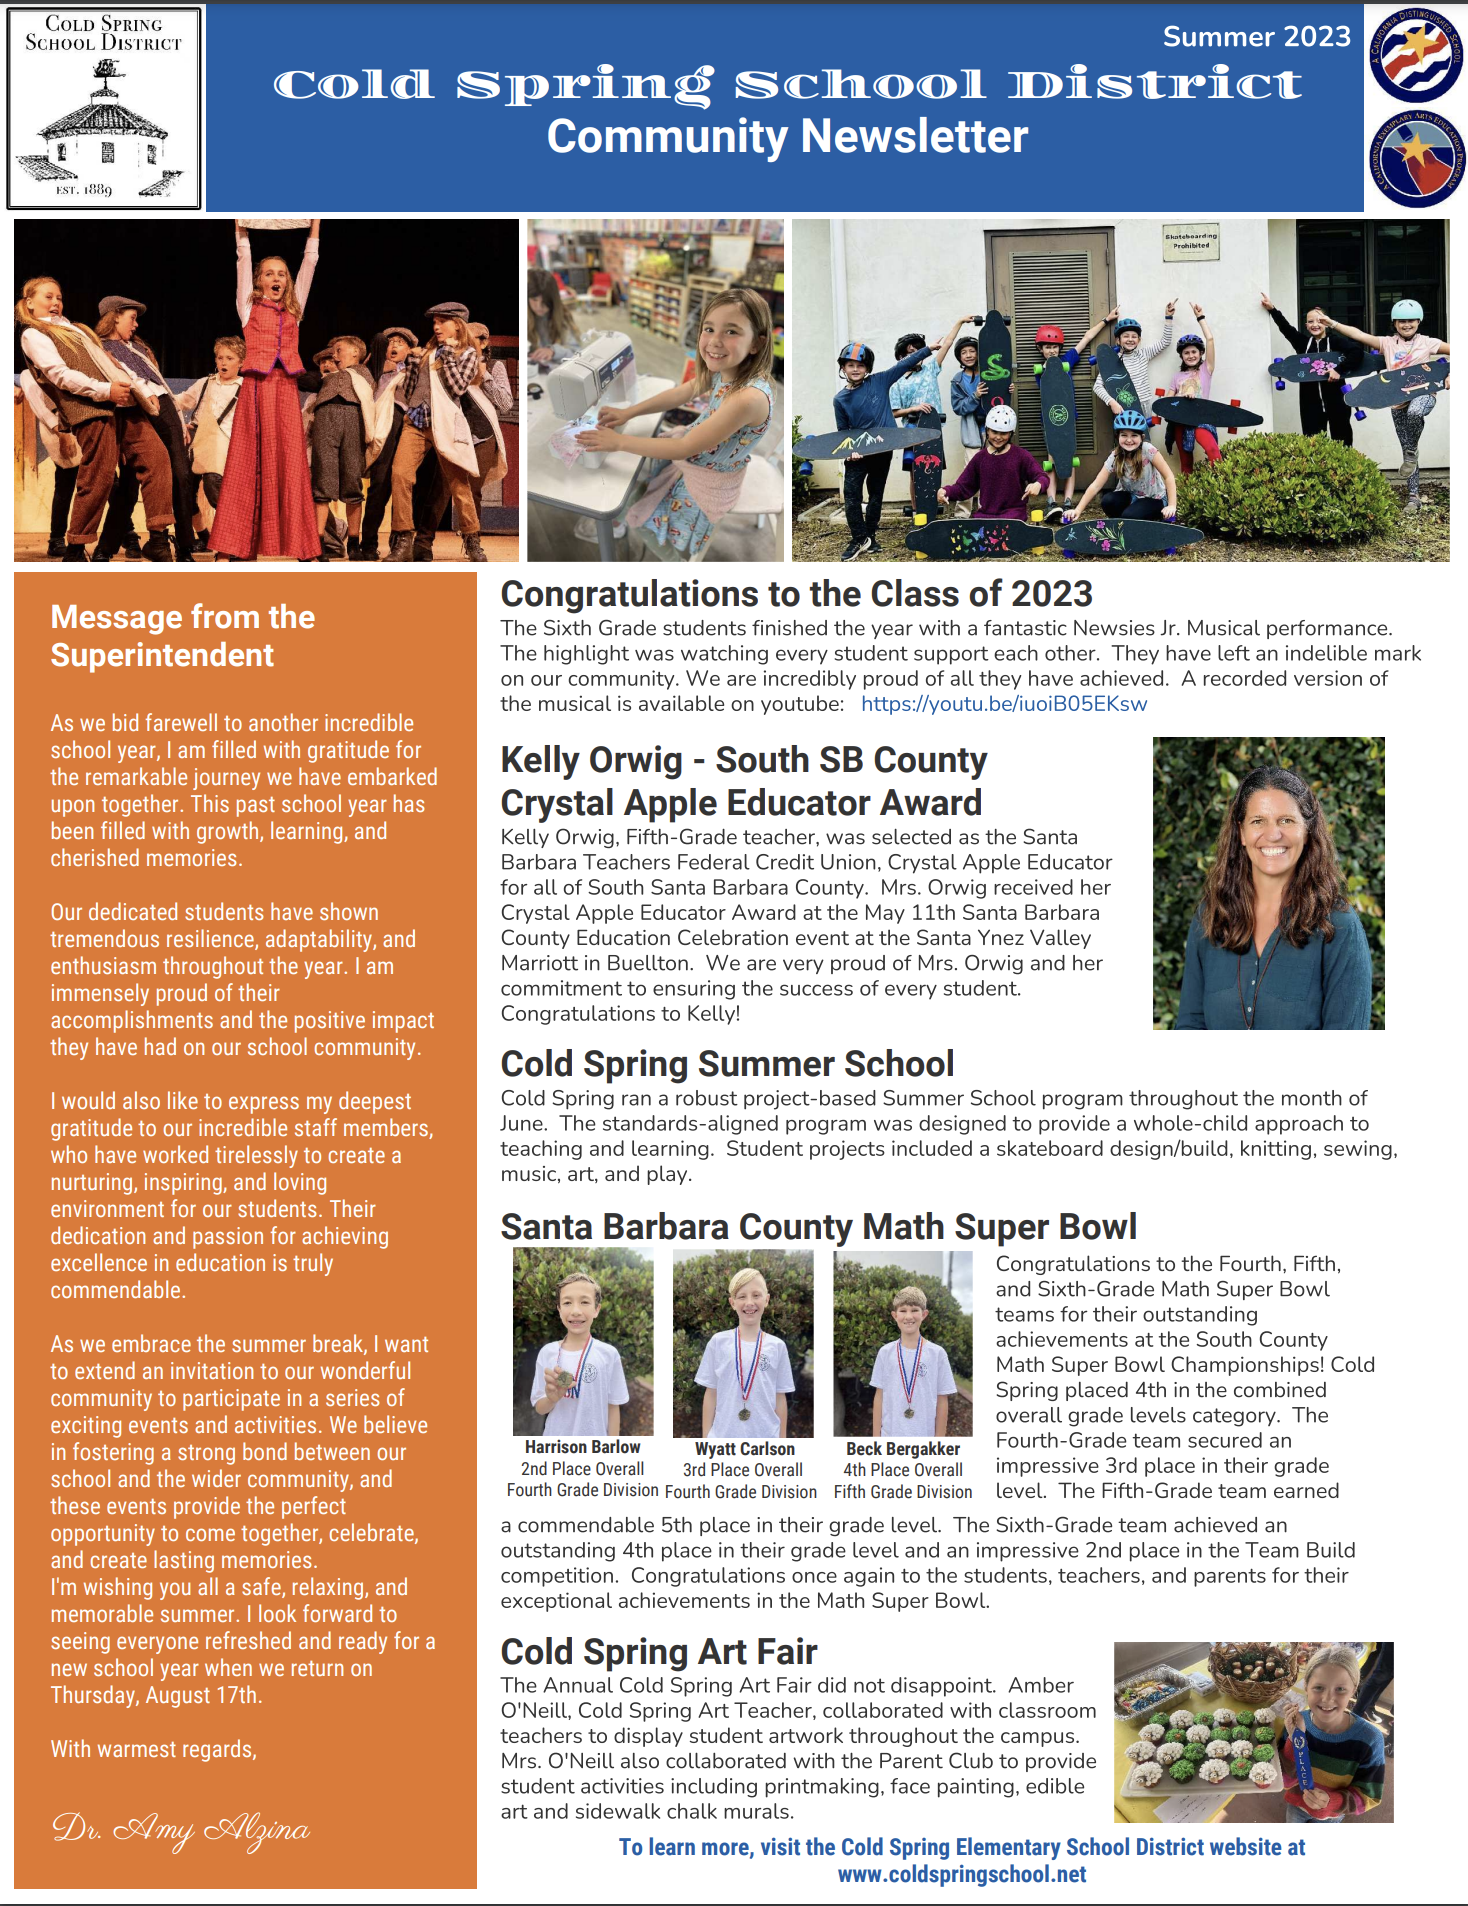 Page 1 of the Summer Newsletter